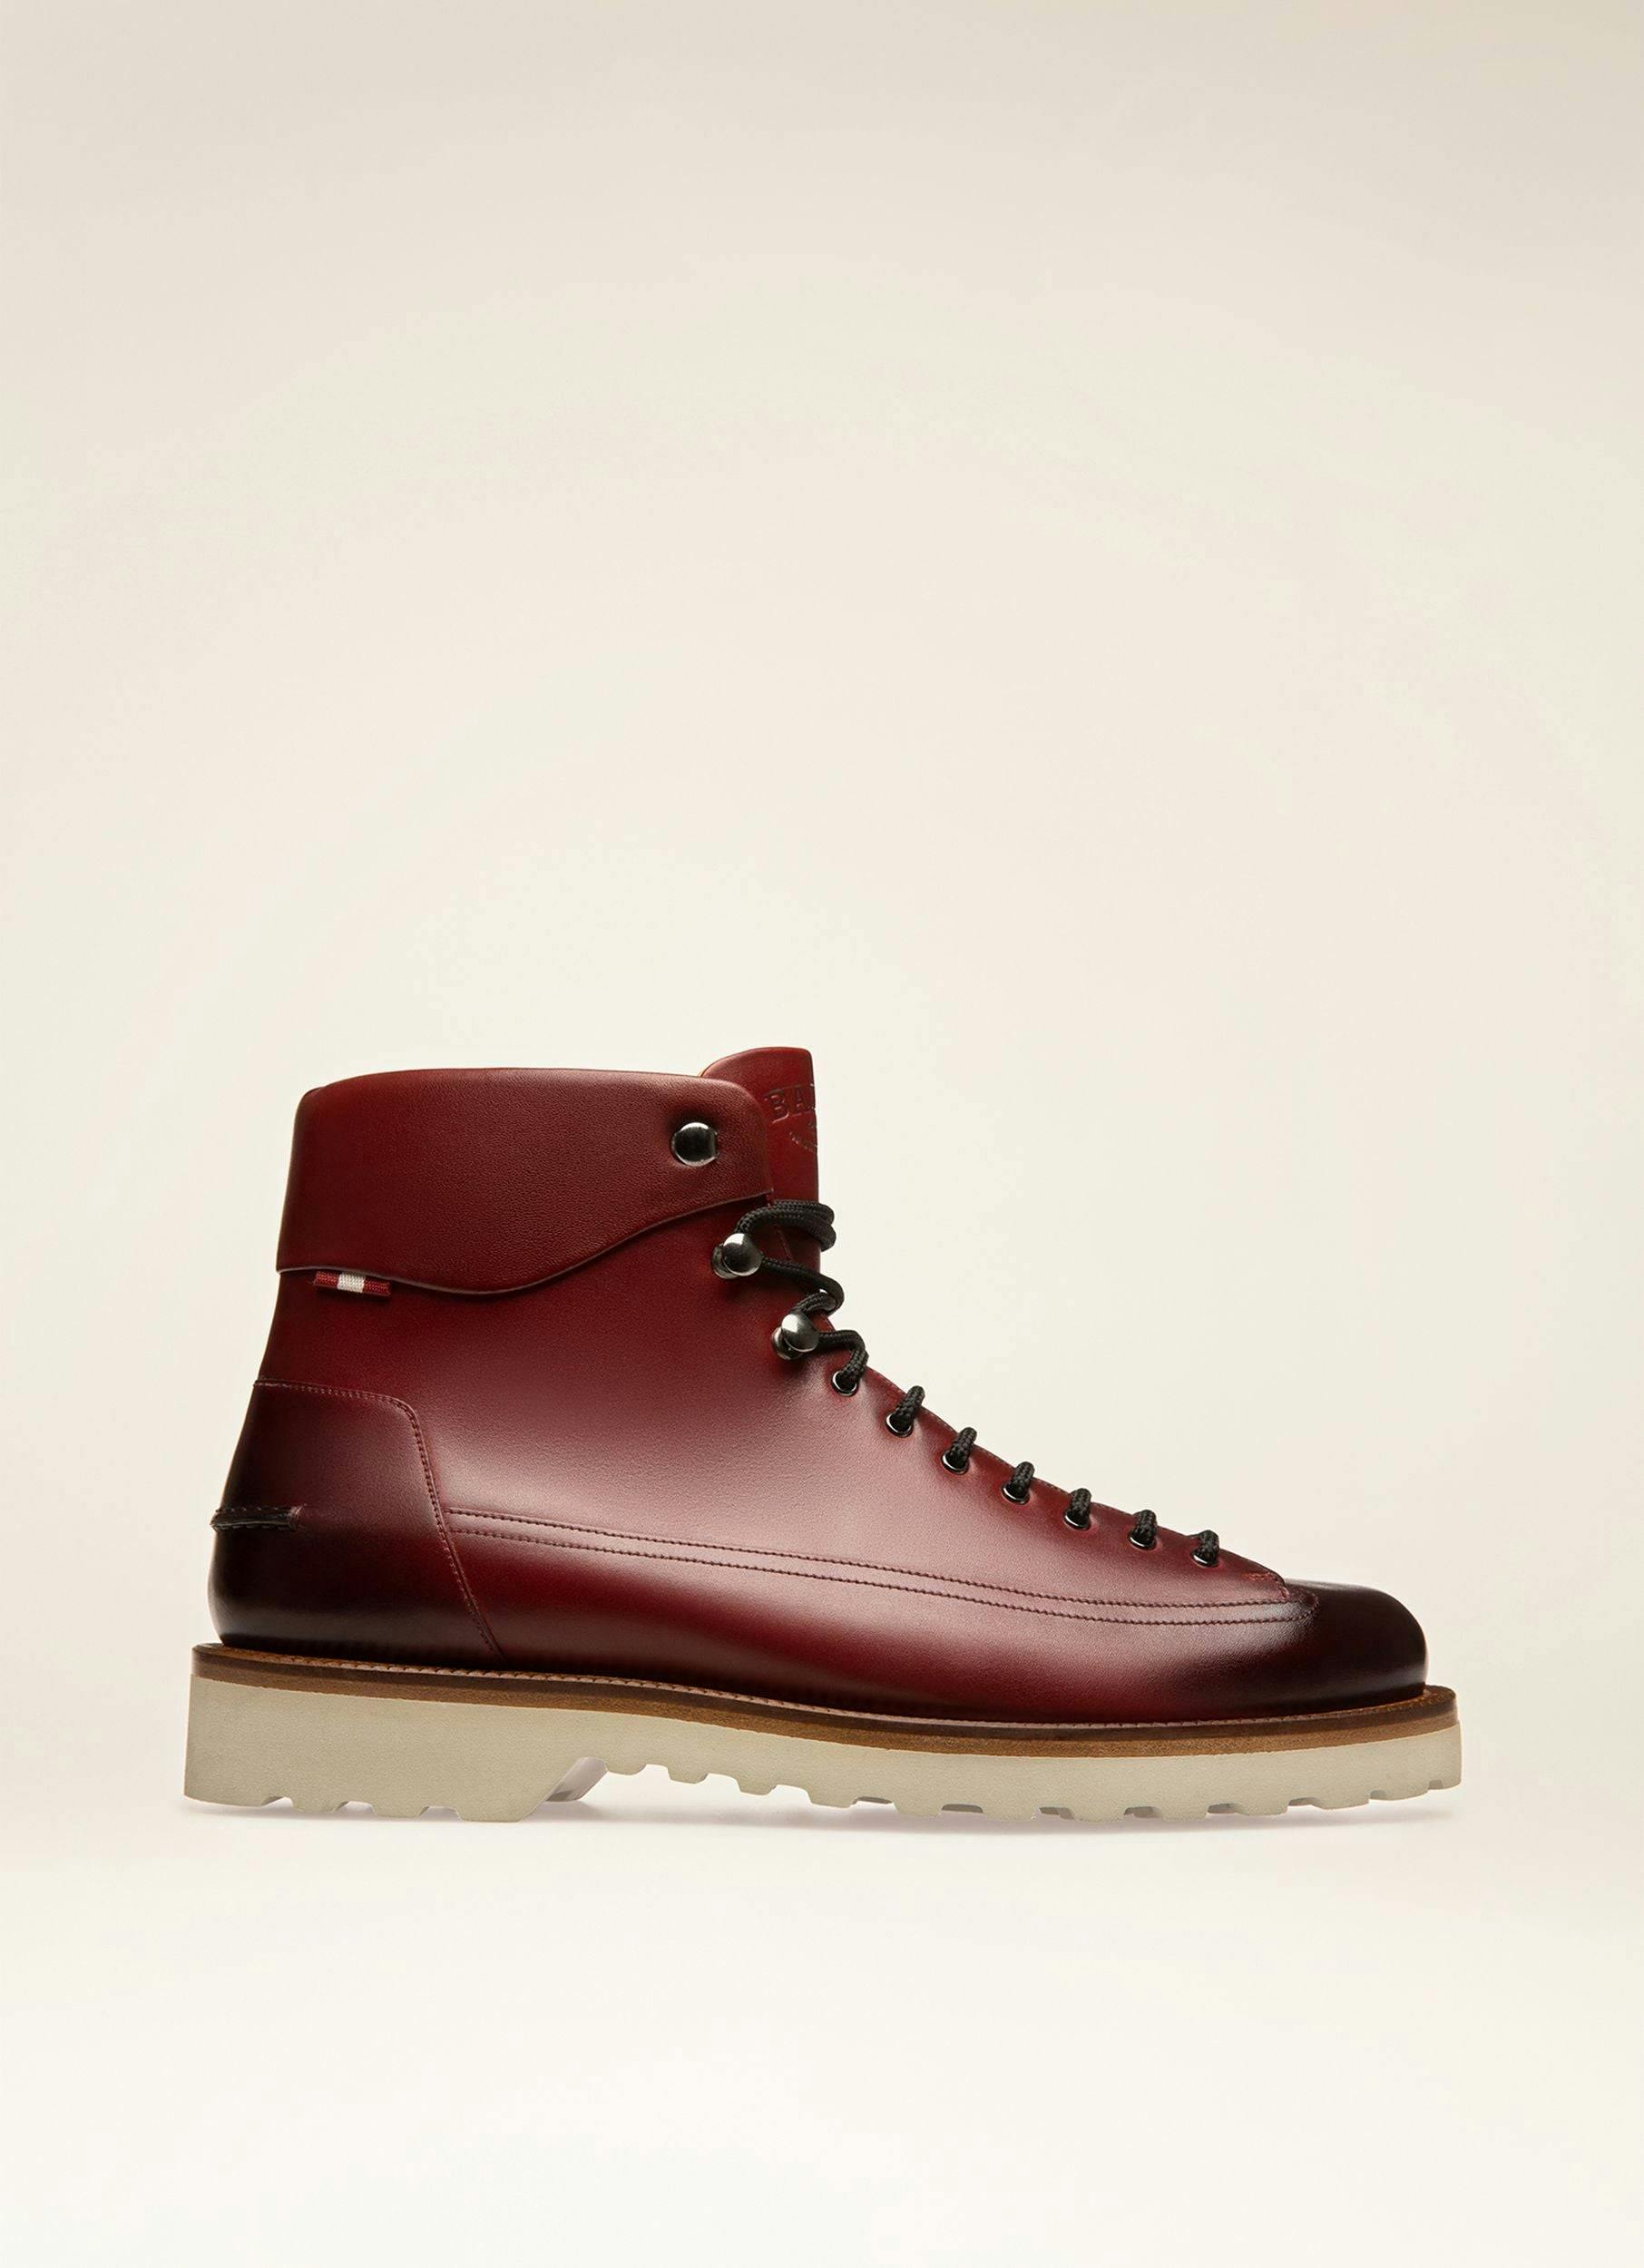 NOTTINGHAM Leather Boots In Heritage Red - Men's - Bally - 01